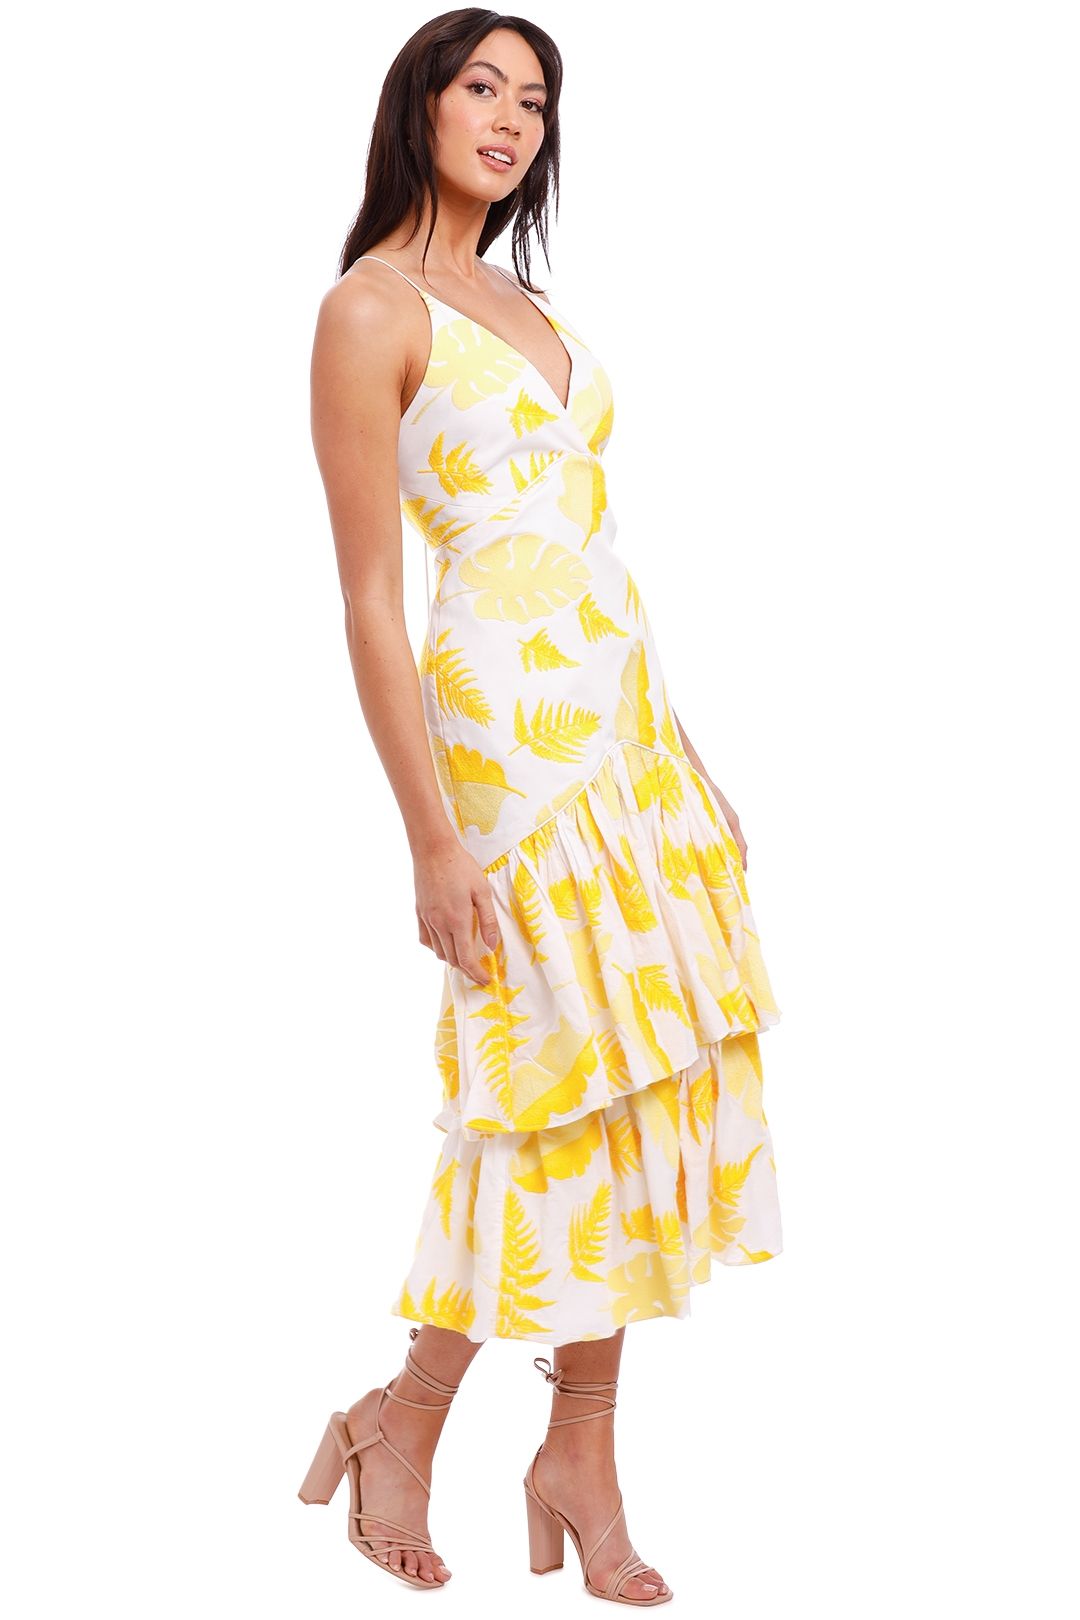 Acler Wray Dress Fit and Flare Yellow Midi